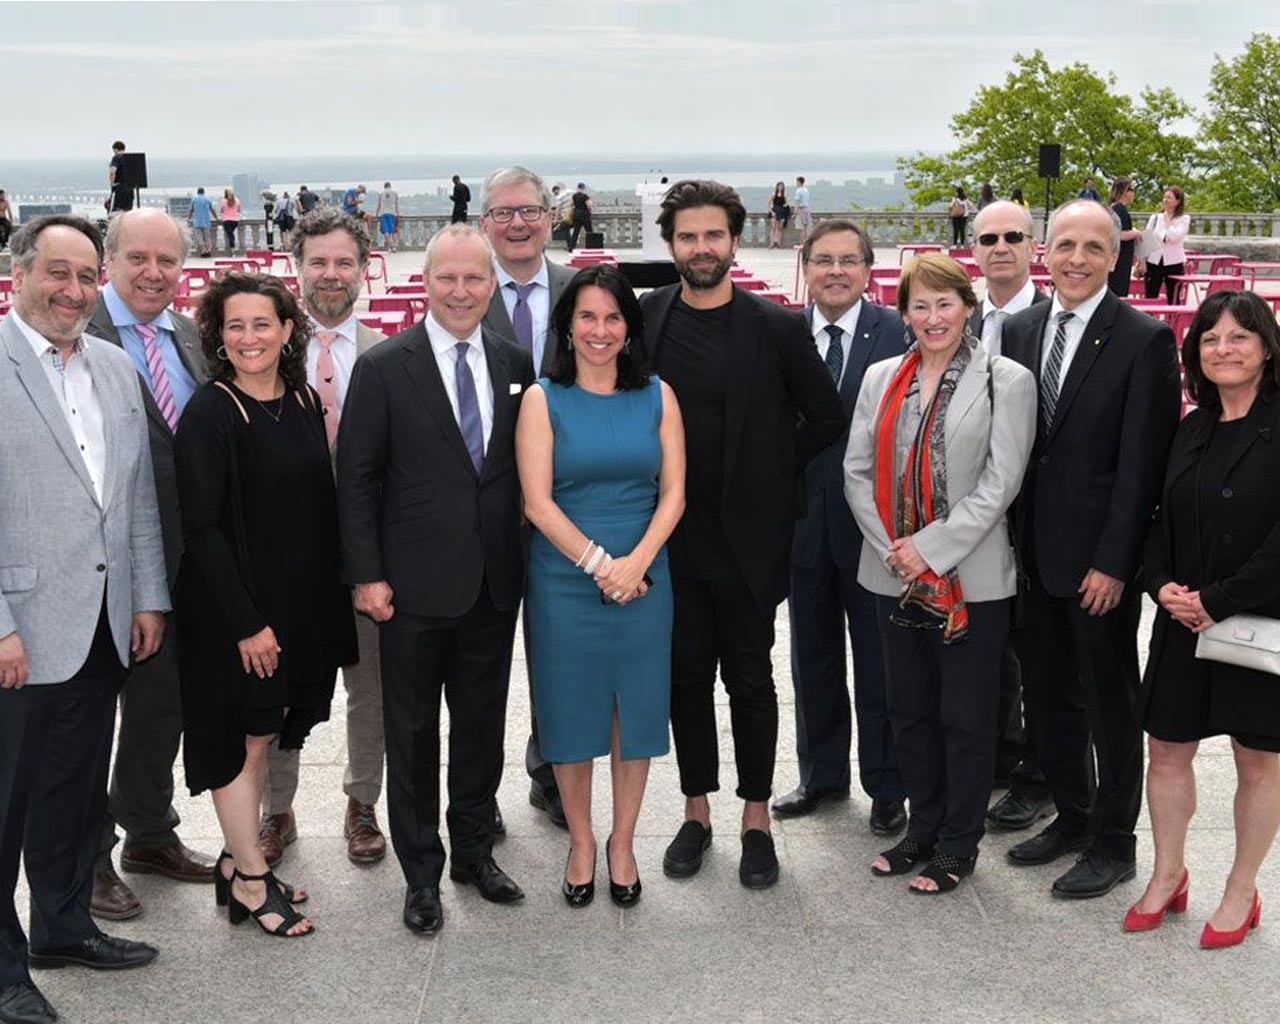 Greater Montreal’s 10 university institutions unite to highlight their contributions to the city